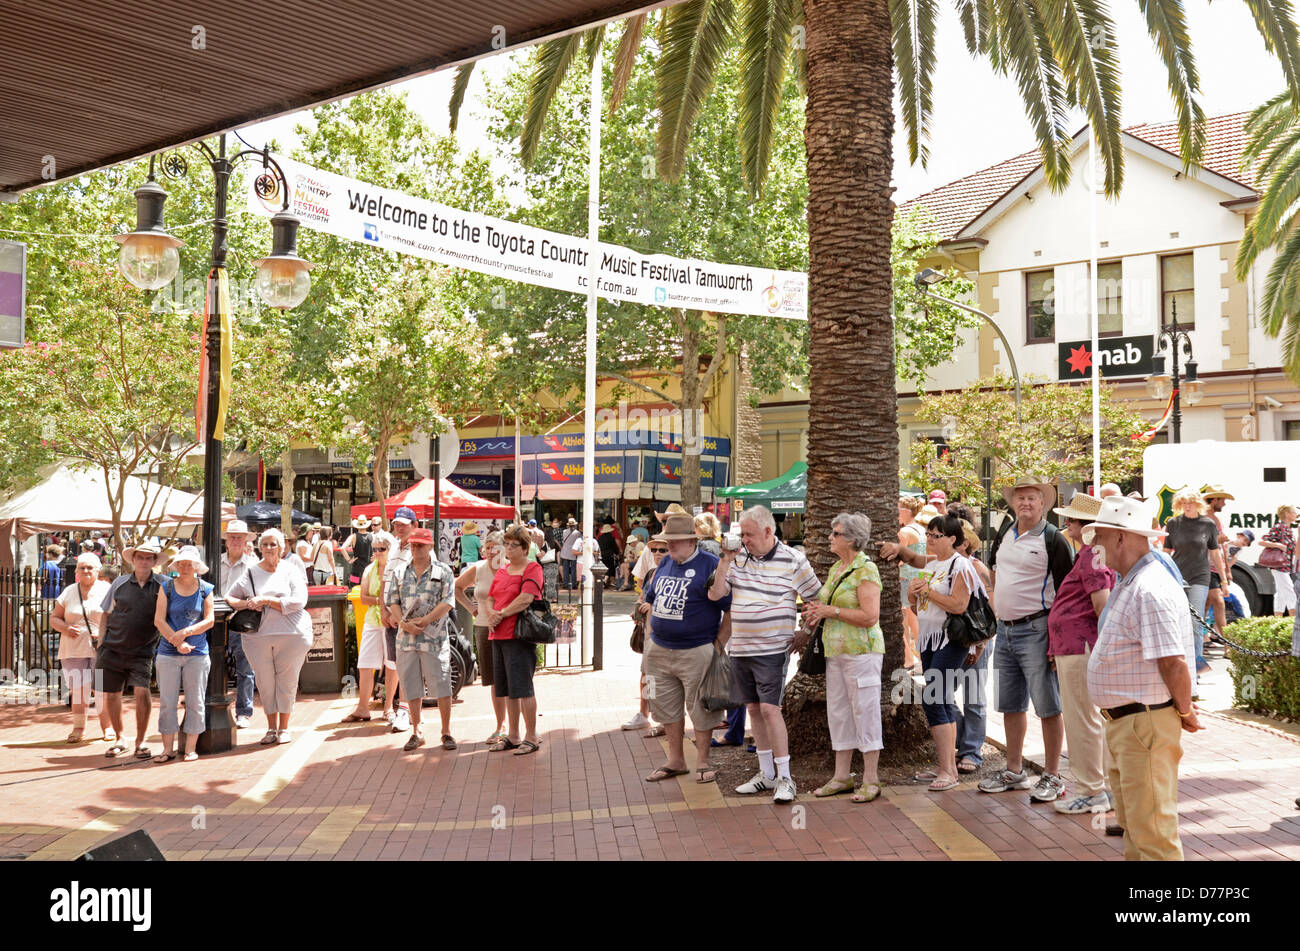 Crowd listening to busker, Tamworth Music Festival Stock Photo